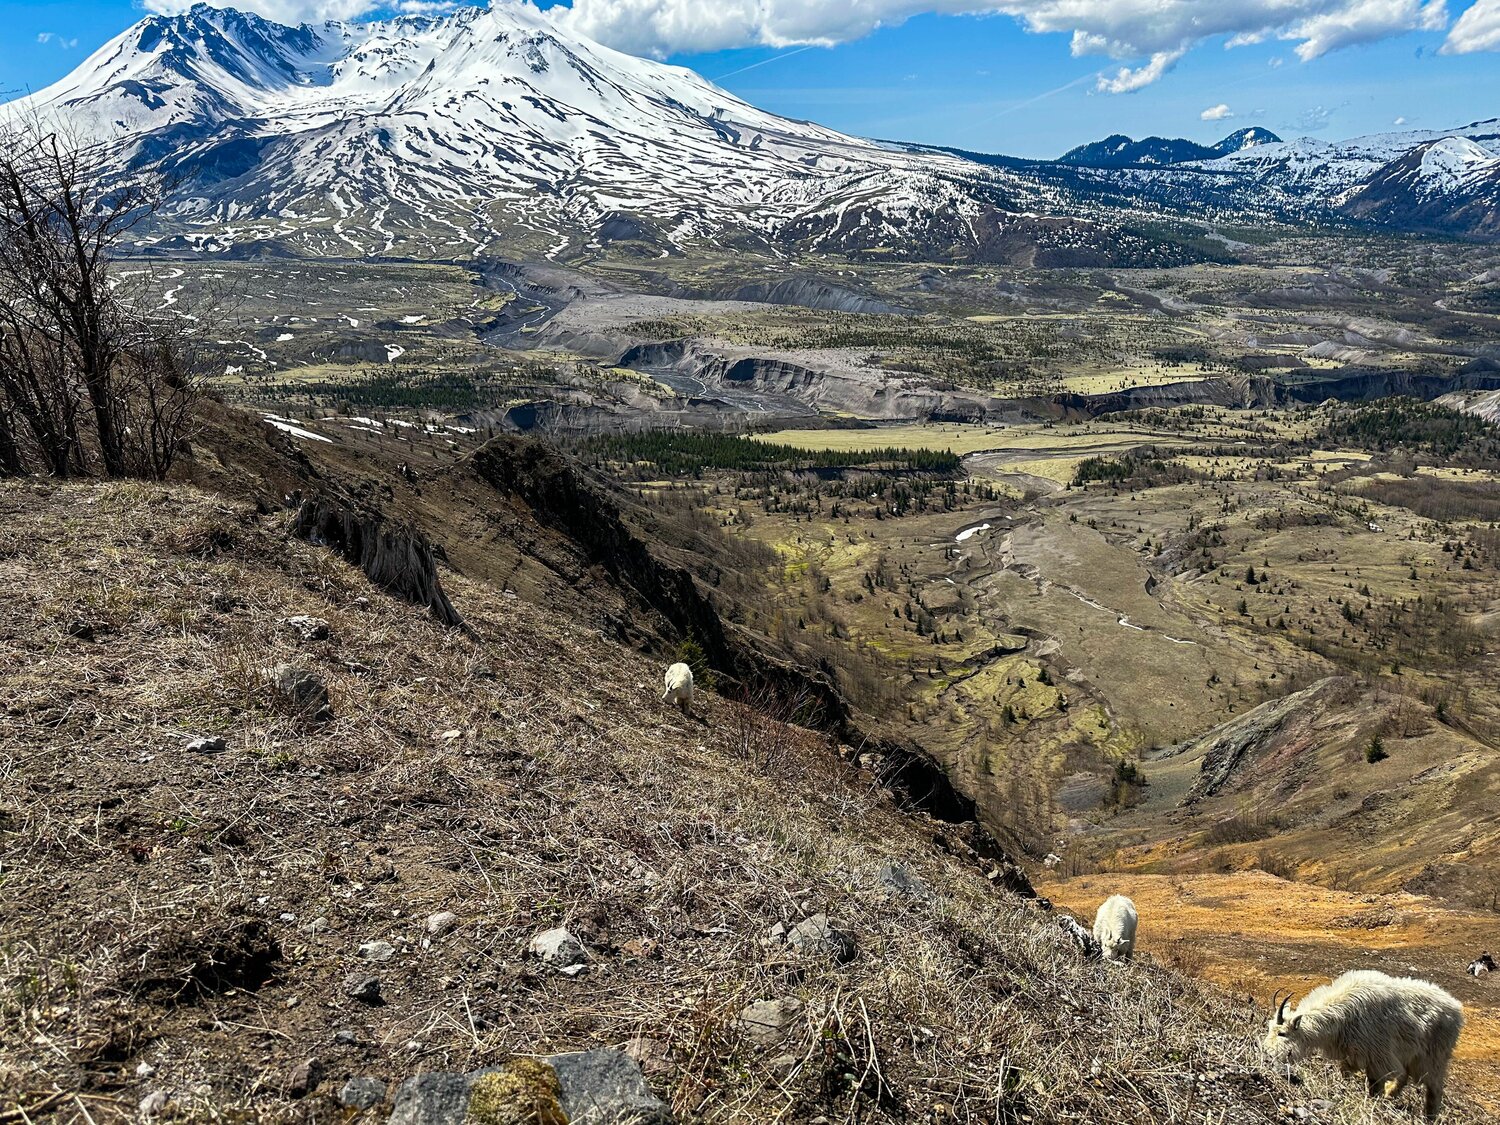 Mount St. Helens is seen from the Elk Rock Viewpoint along Spirit Lake Highway on Thursday, May 11.